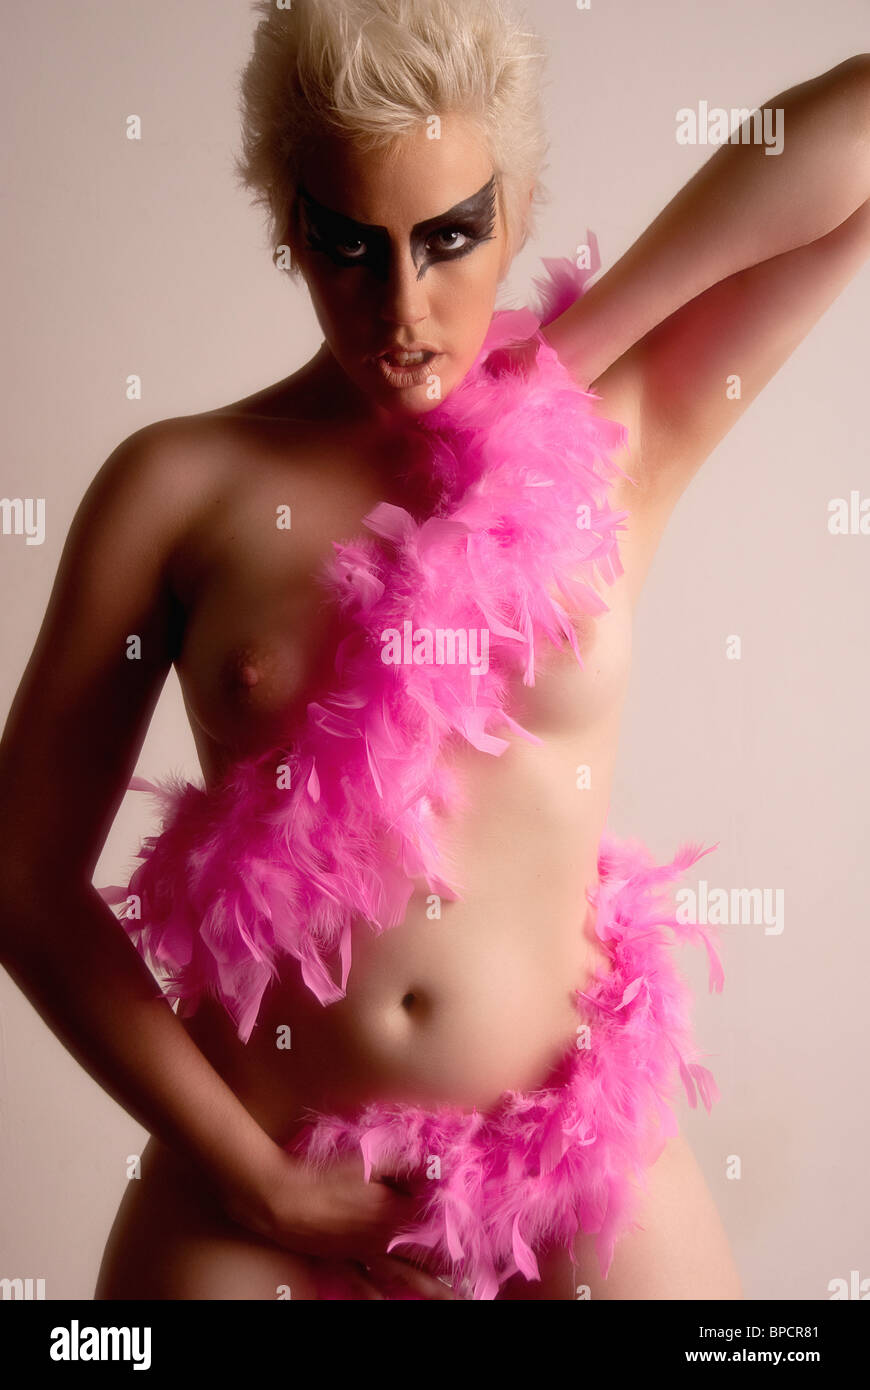 naked girl with feather boa round her Stock Photo